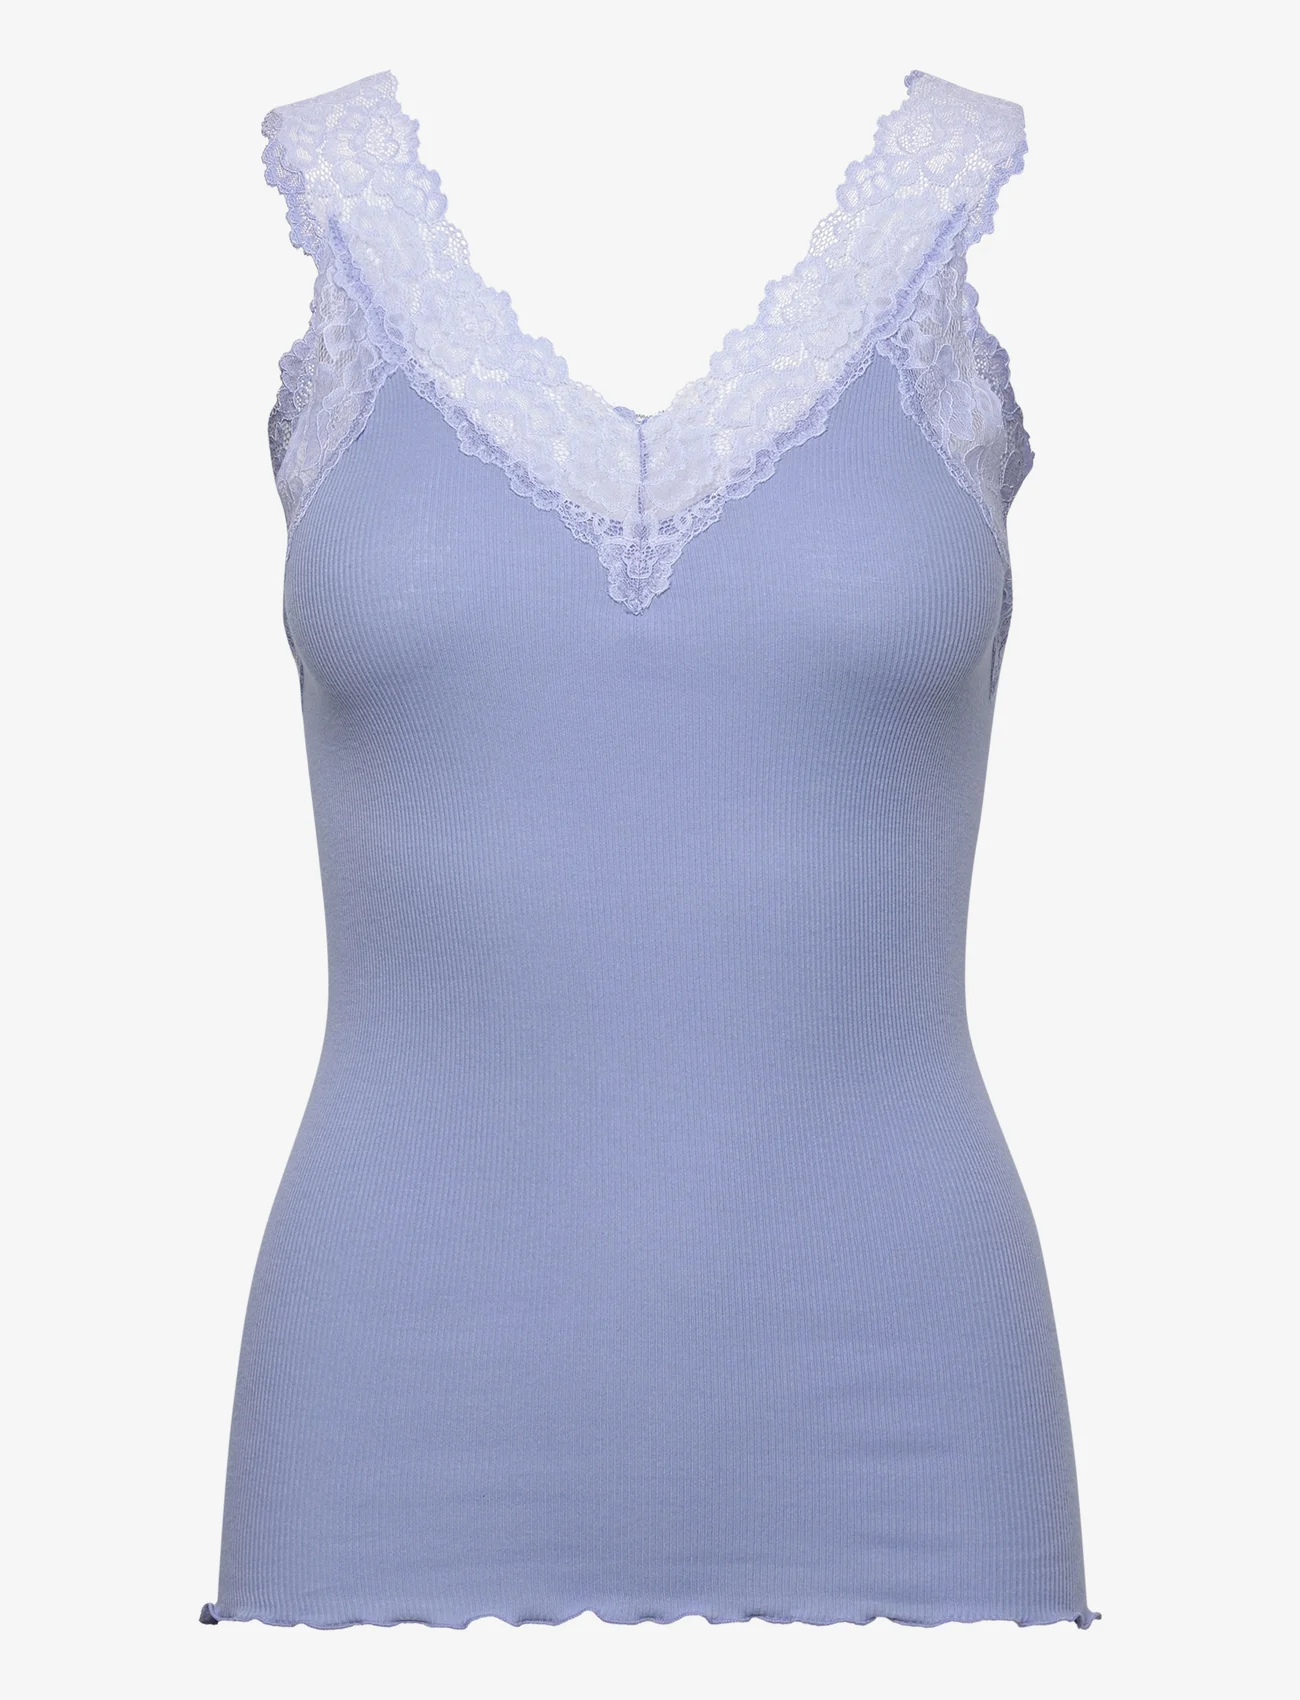 Rosemunde - Organic top w/ lace - lowest prices - blue heaven - 0